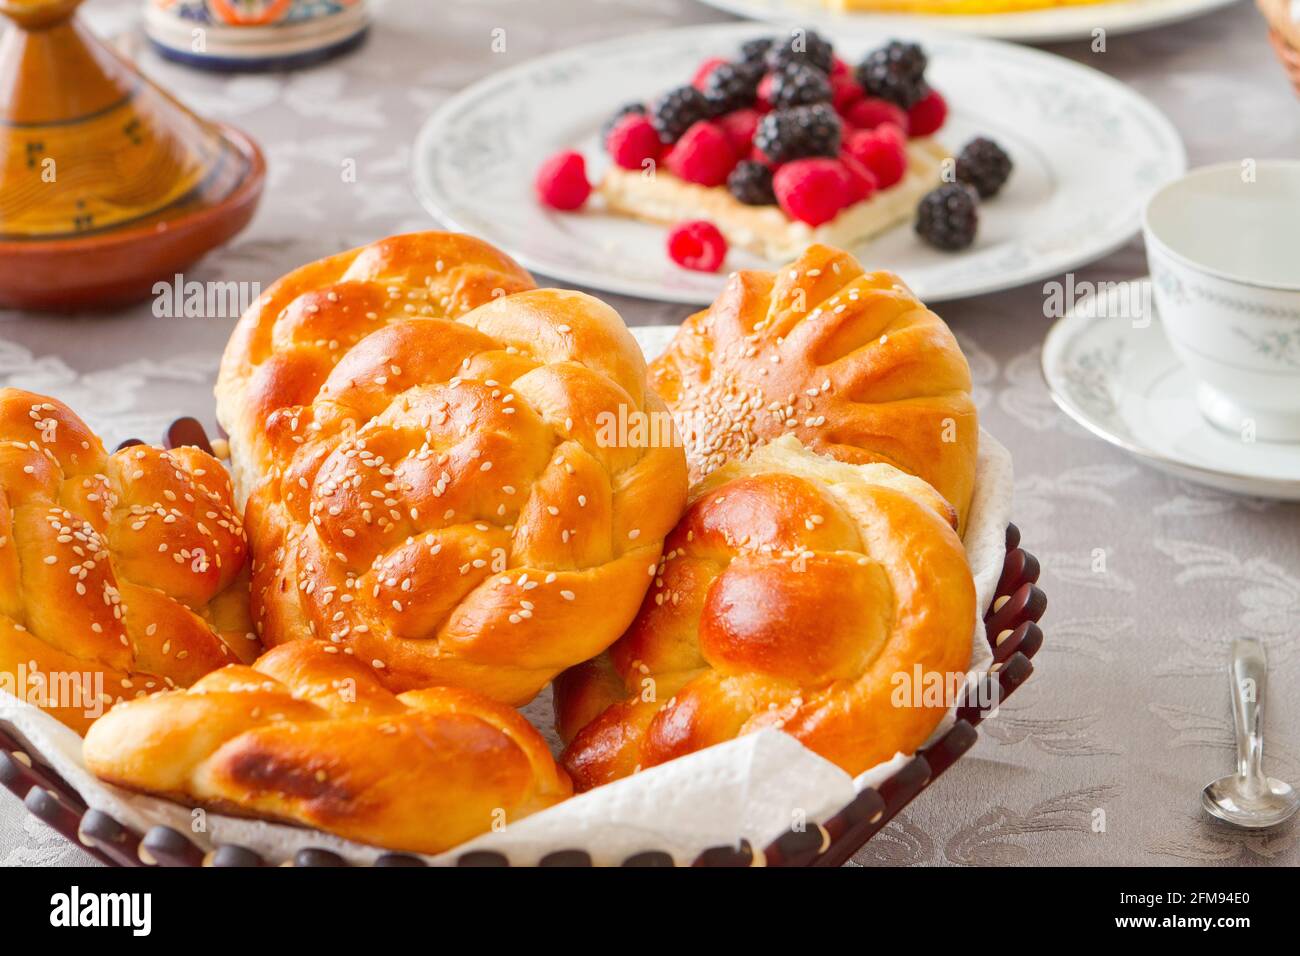 Assorted breakfast on a table Stock Photo